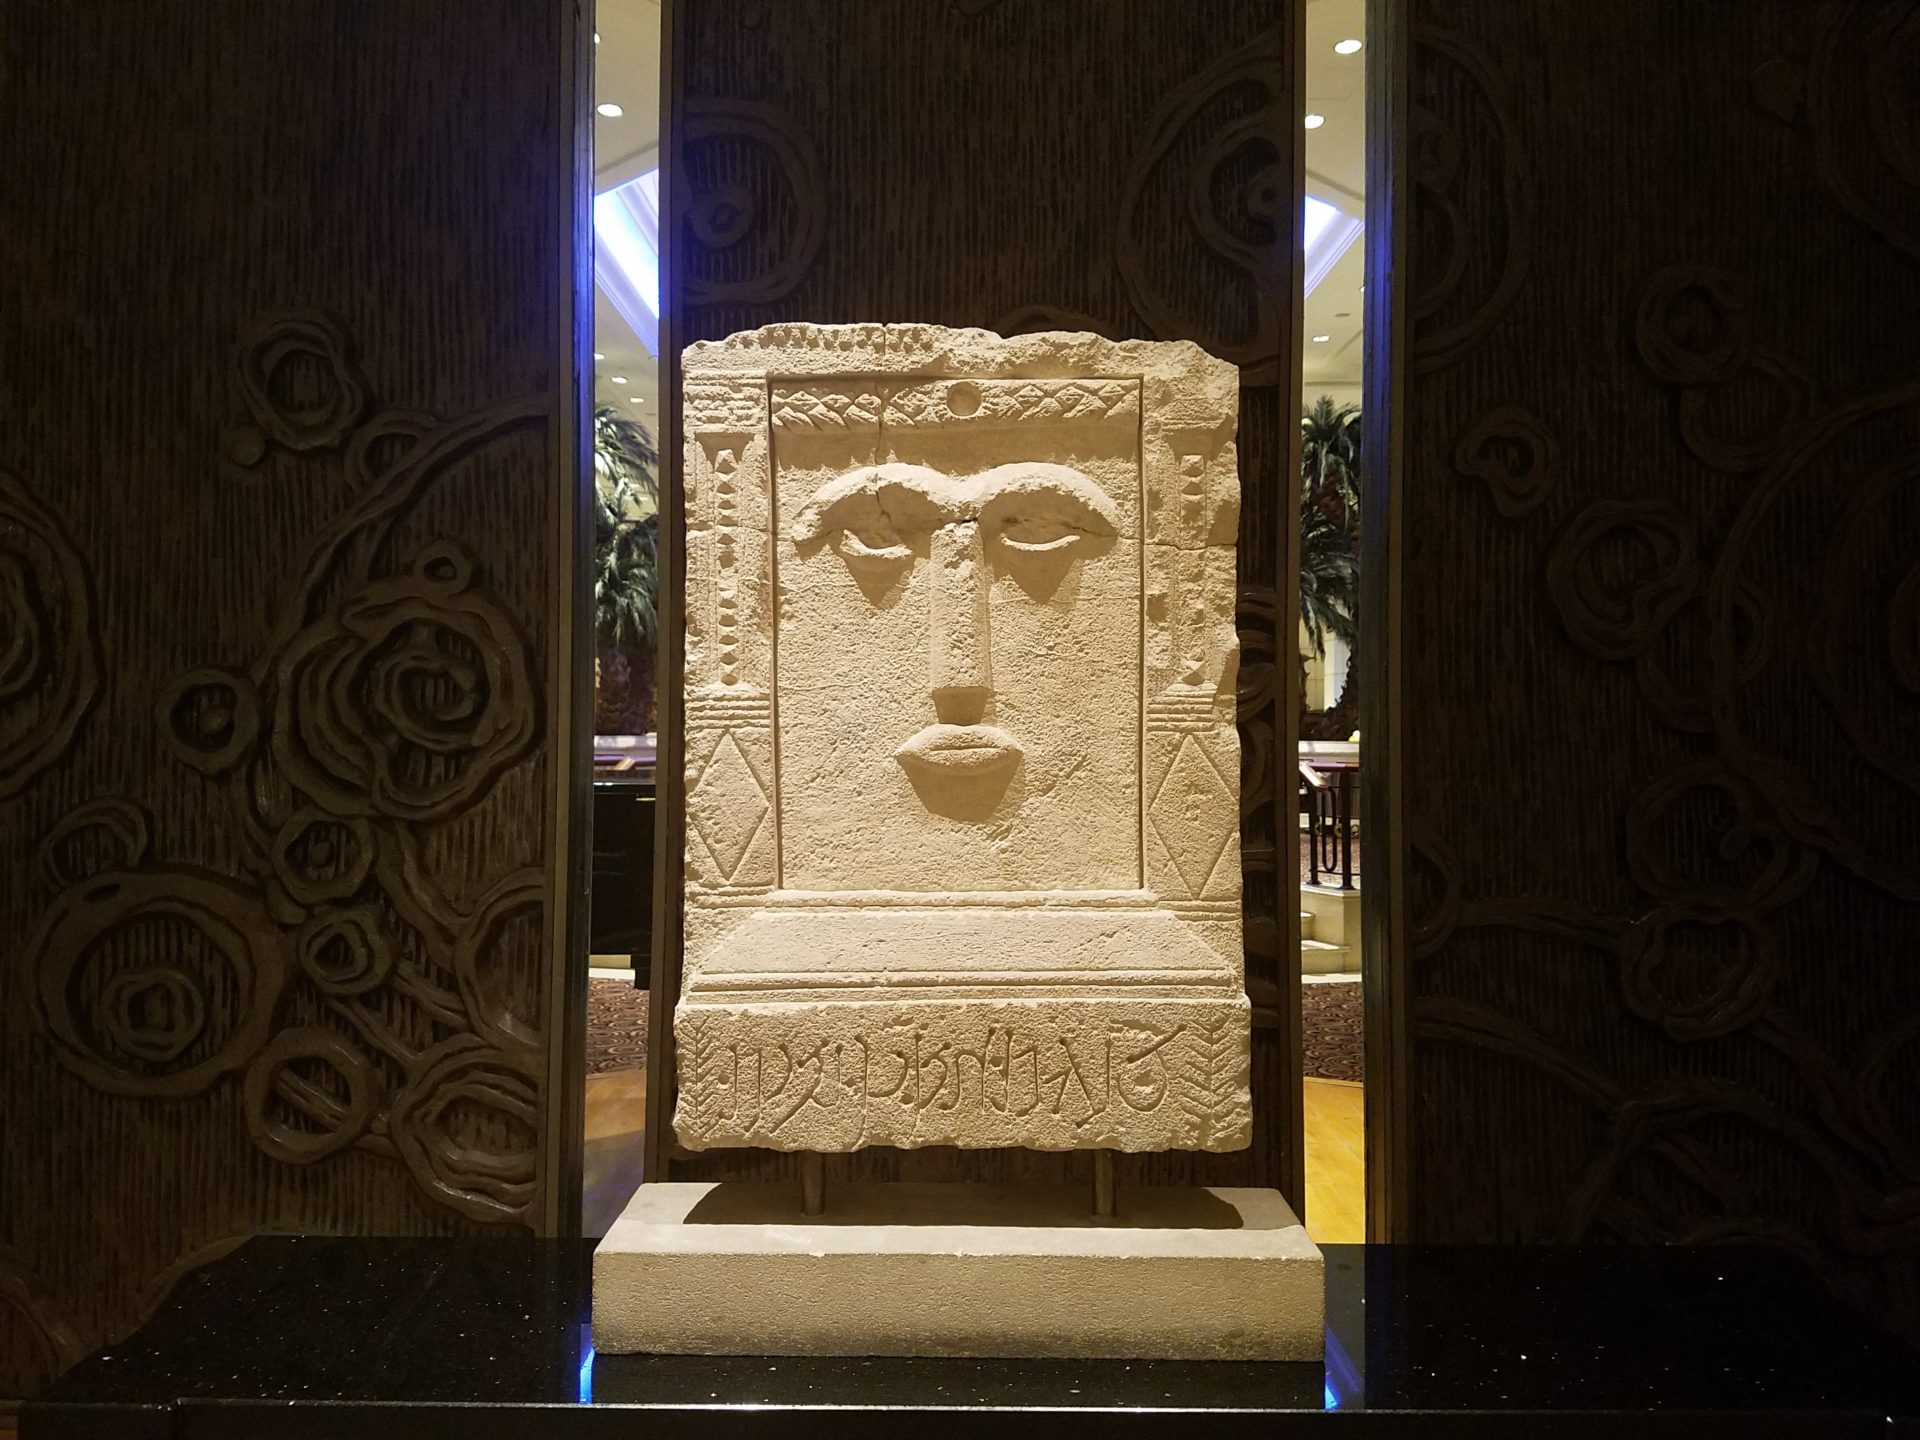 a stone sculpture in a room